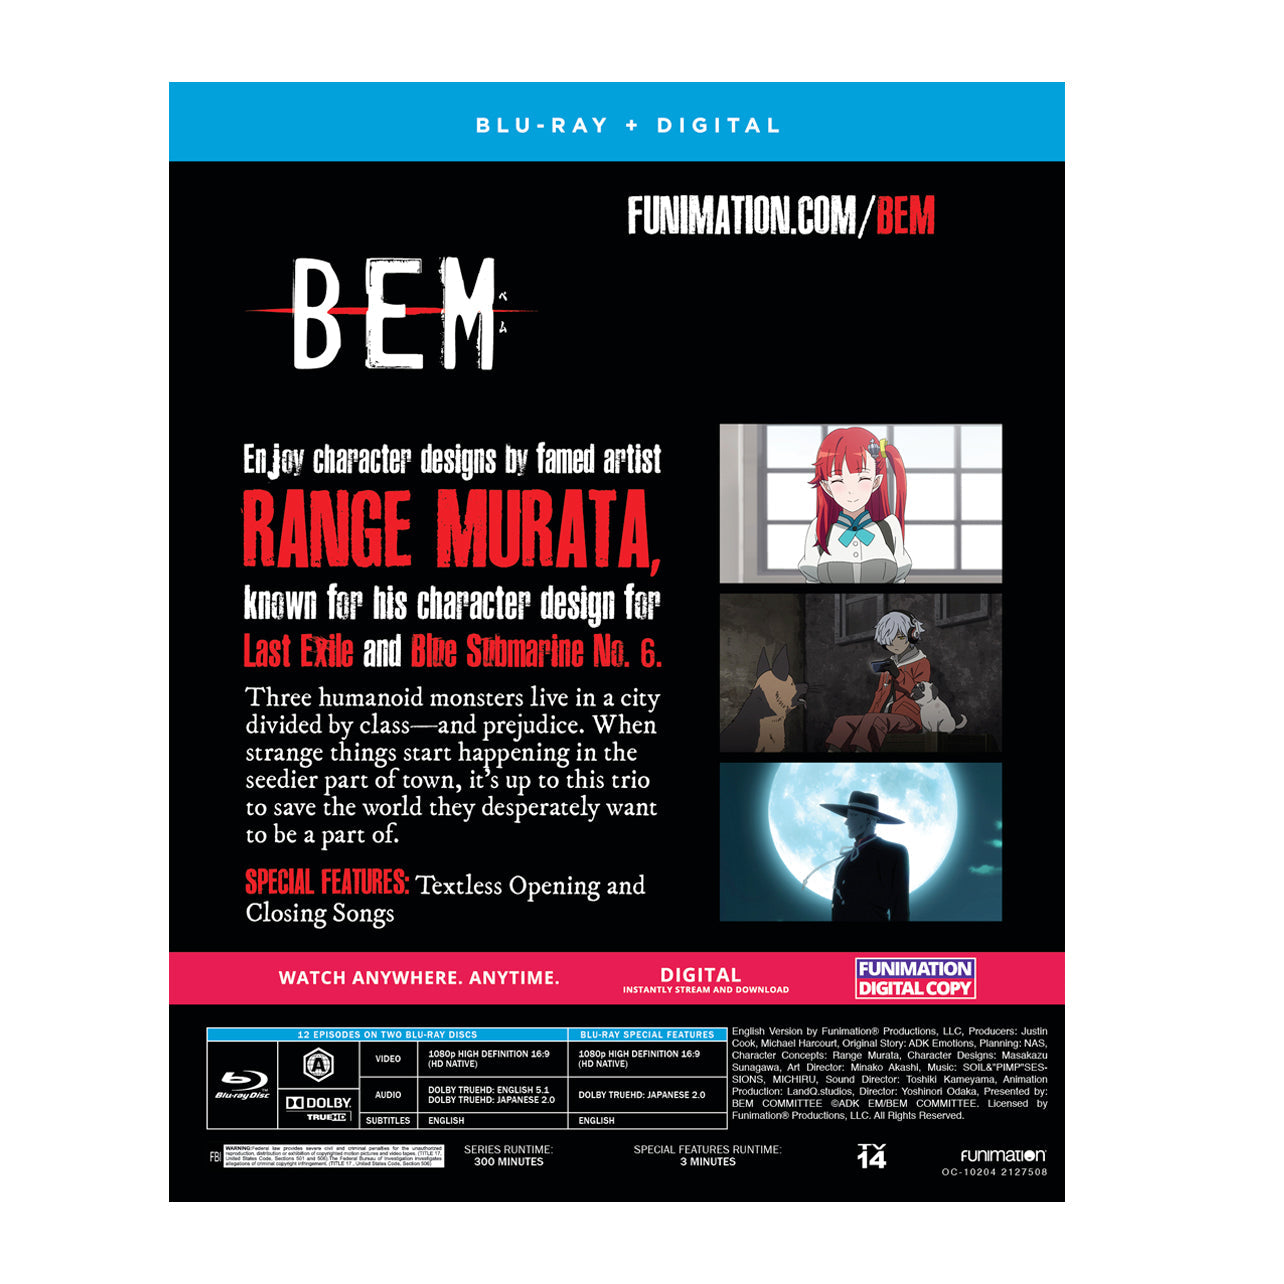 BEM - The Complete Series - Blu-ray image count 1